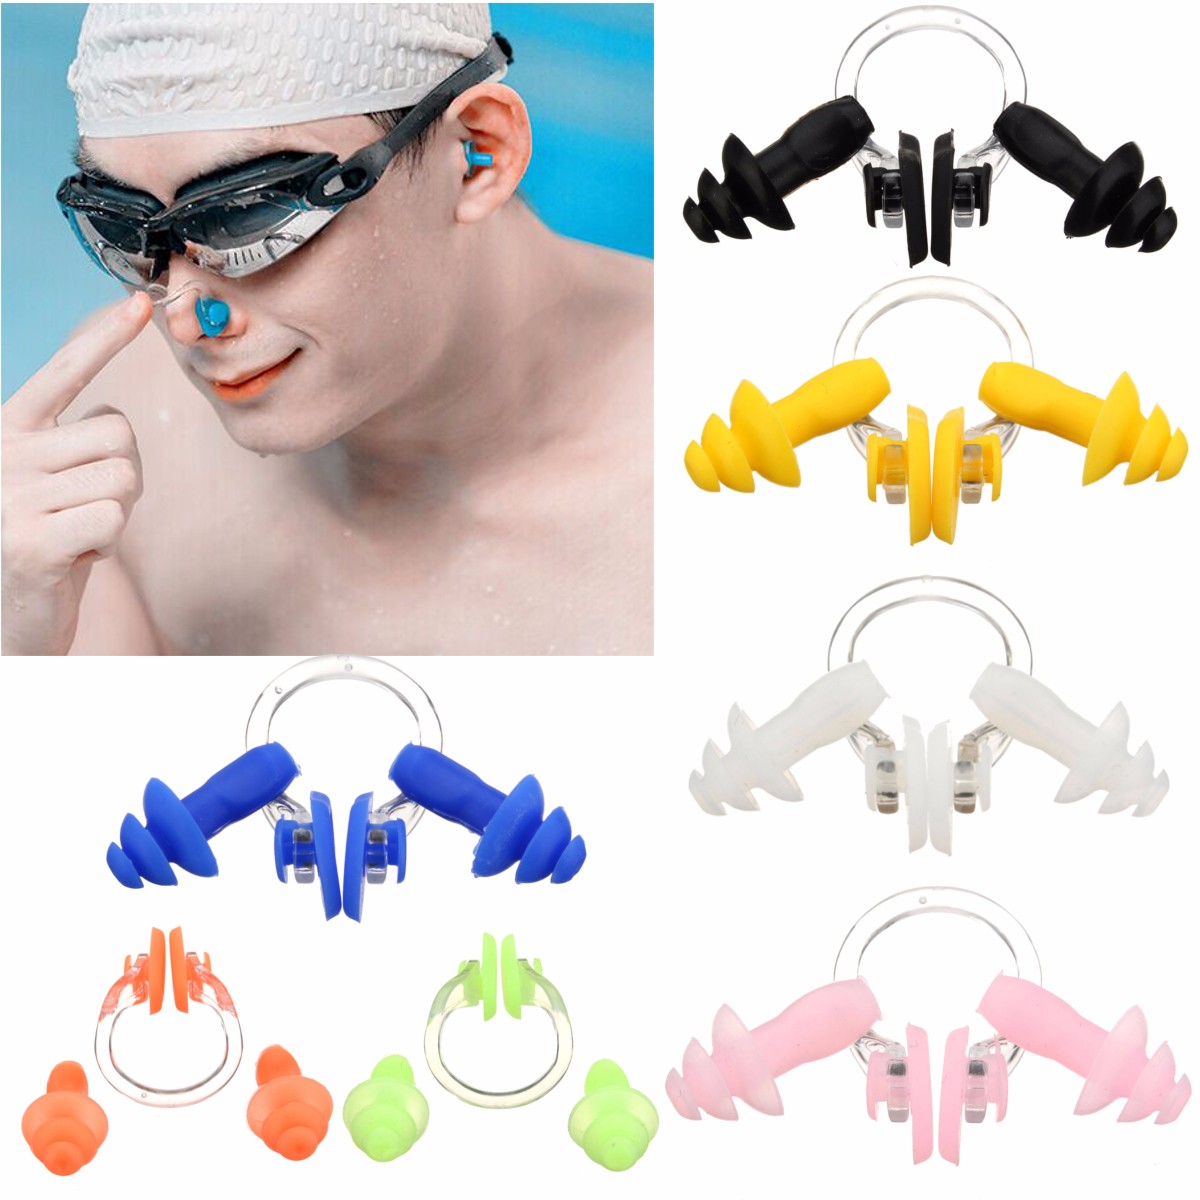 Waterproof Swimming Soft Silicone Nose Clip Ear Plugs Earplugs with Box - к...